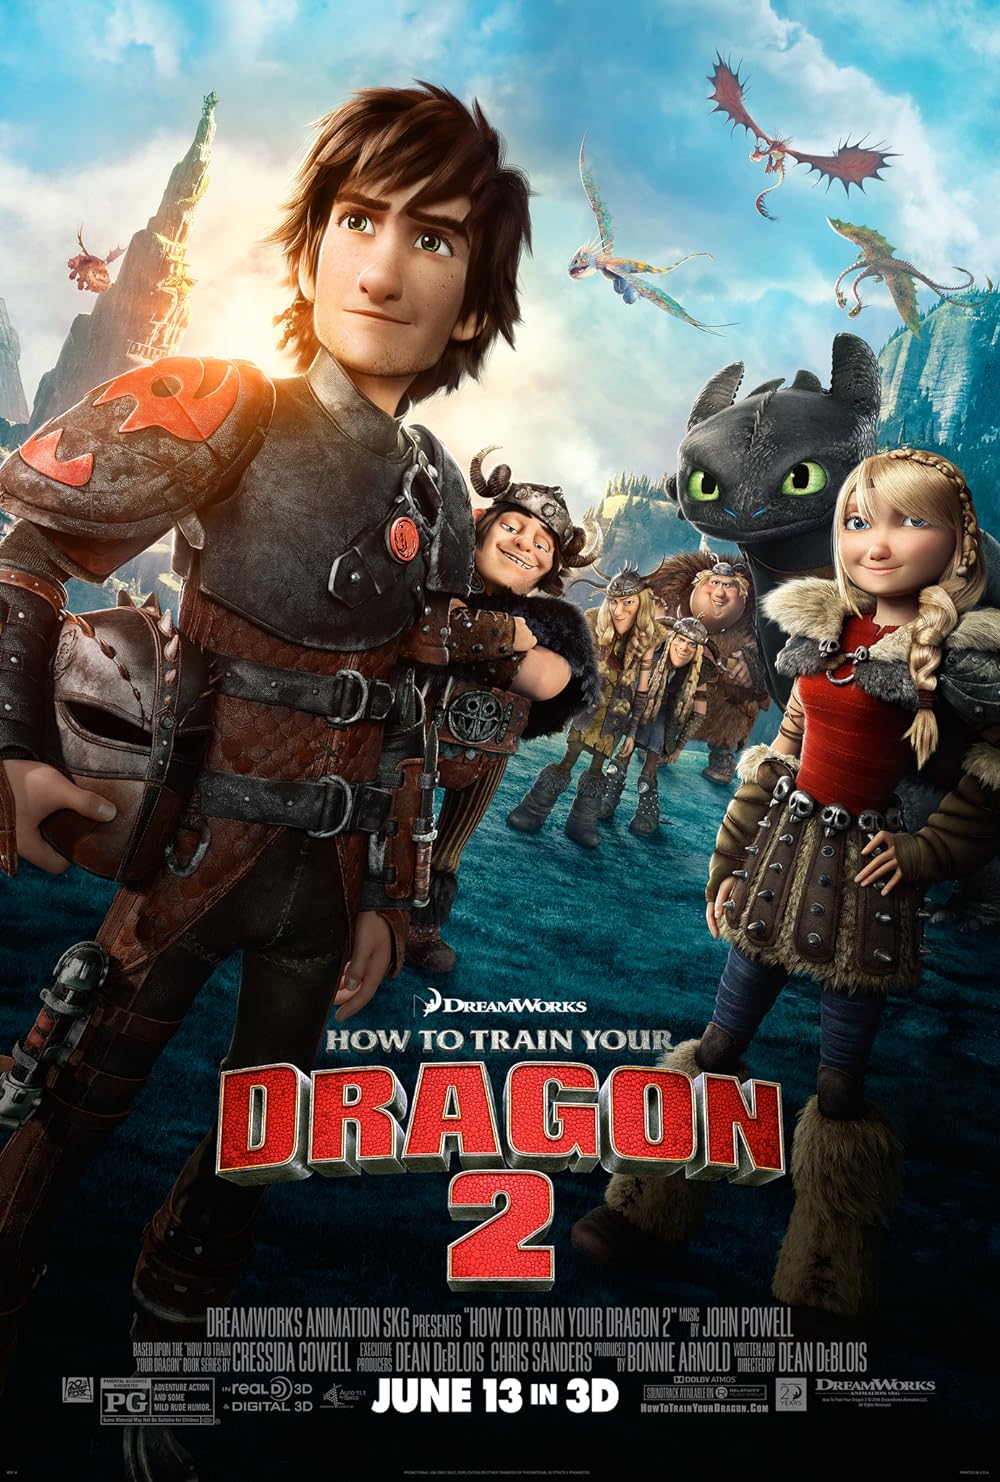 How To Train Your Dragon 2 (1 July 2024, Netflix)  A sequel to How to Train Your Dragon (2010) and the second instalment in the trilogy, this story is set five years after the first film. It follows twenty-year-old Hiccup and his friends as they meet Valka, Hiccup’s long-lost mother, and Drago Bludvist, a madman who wants to conquer the world.